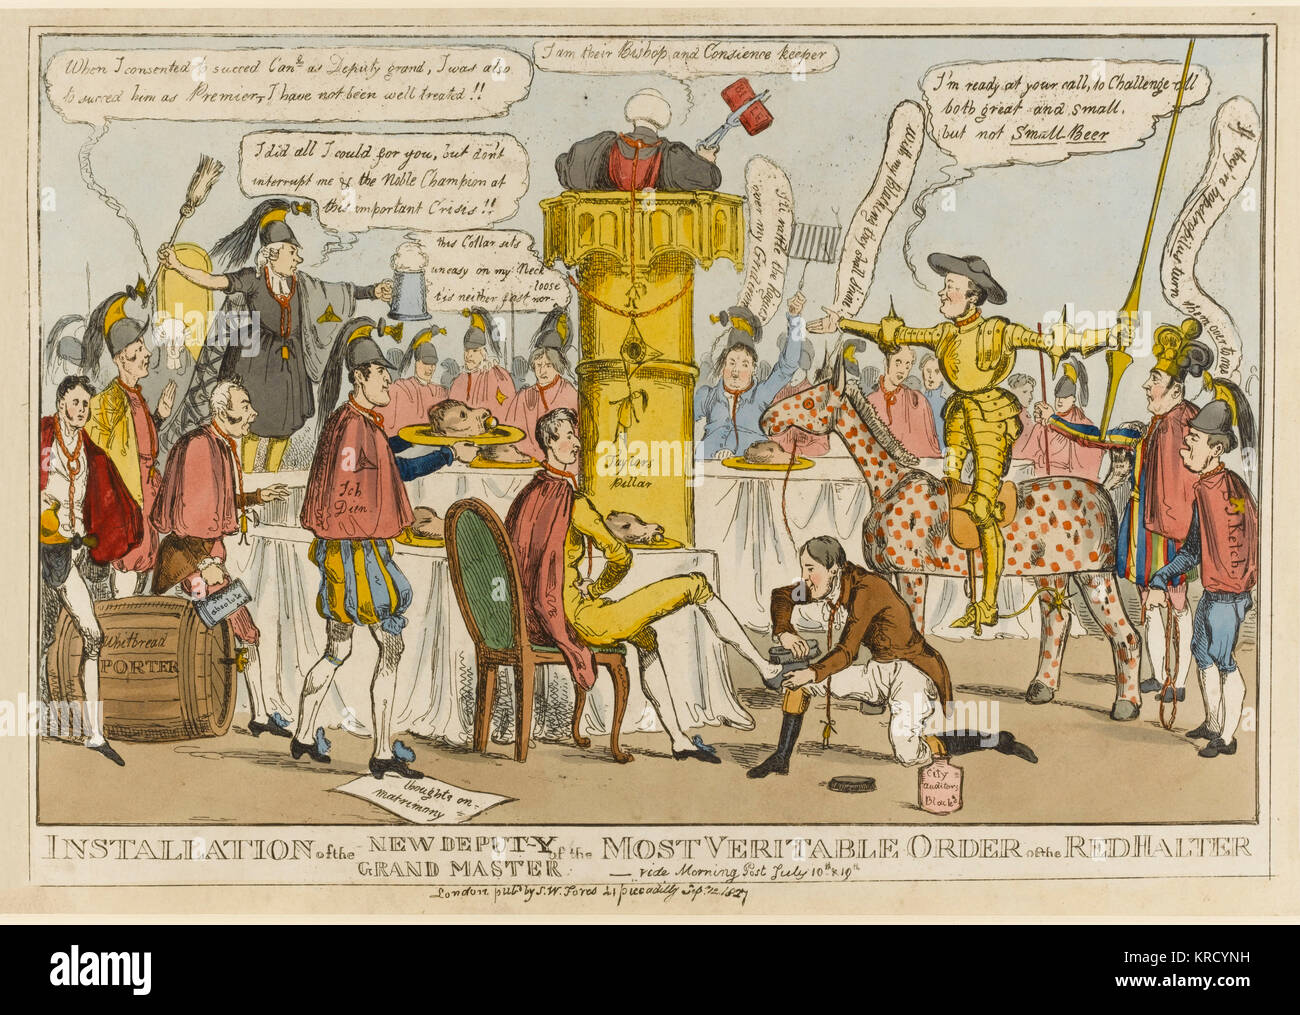 Satirical cartoon, Installation of the New Deputy Grand Master of the Most Veritable Order of the Red Halter - vide Morning Post July 10th &amp; 19th.  A ceremonial dinner is taking place. The guests wear red cloaks, helmets and nooses. Most are politicians and include Whitbread, Brougham (holding a broom) and Matthew Wood.  Sir Francis Burdett sits in a chair while Henry Hunt polishes his shoes.  In a pulpit labelled Taylors Pillar is a bishop in back view, Robert Taylor, who was arrested for blasphemy.  Don Quixote on a wooden horse is apparently Hobhouse.  Cobbett is identifiable by his att Stock Photo